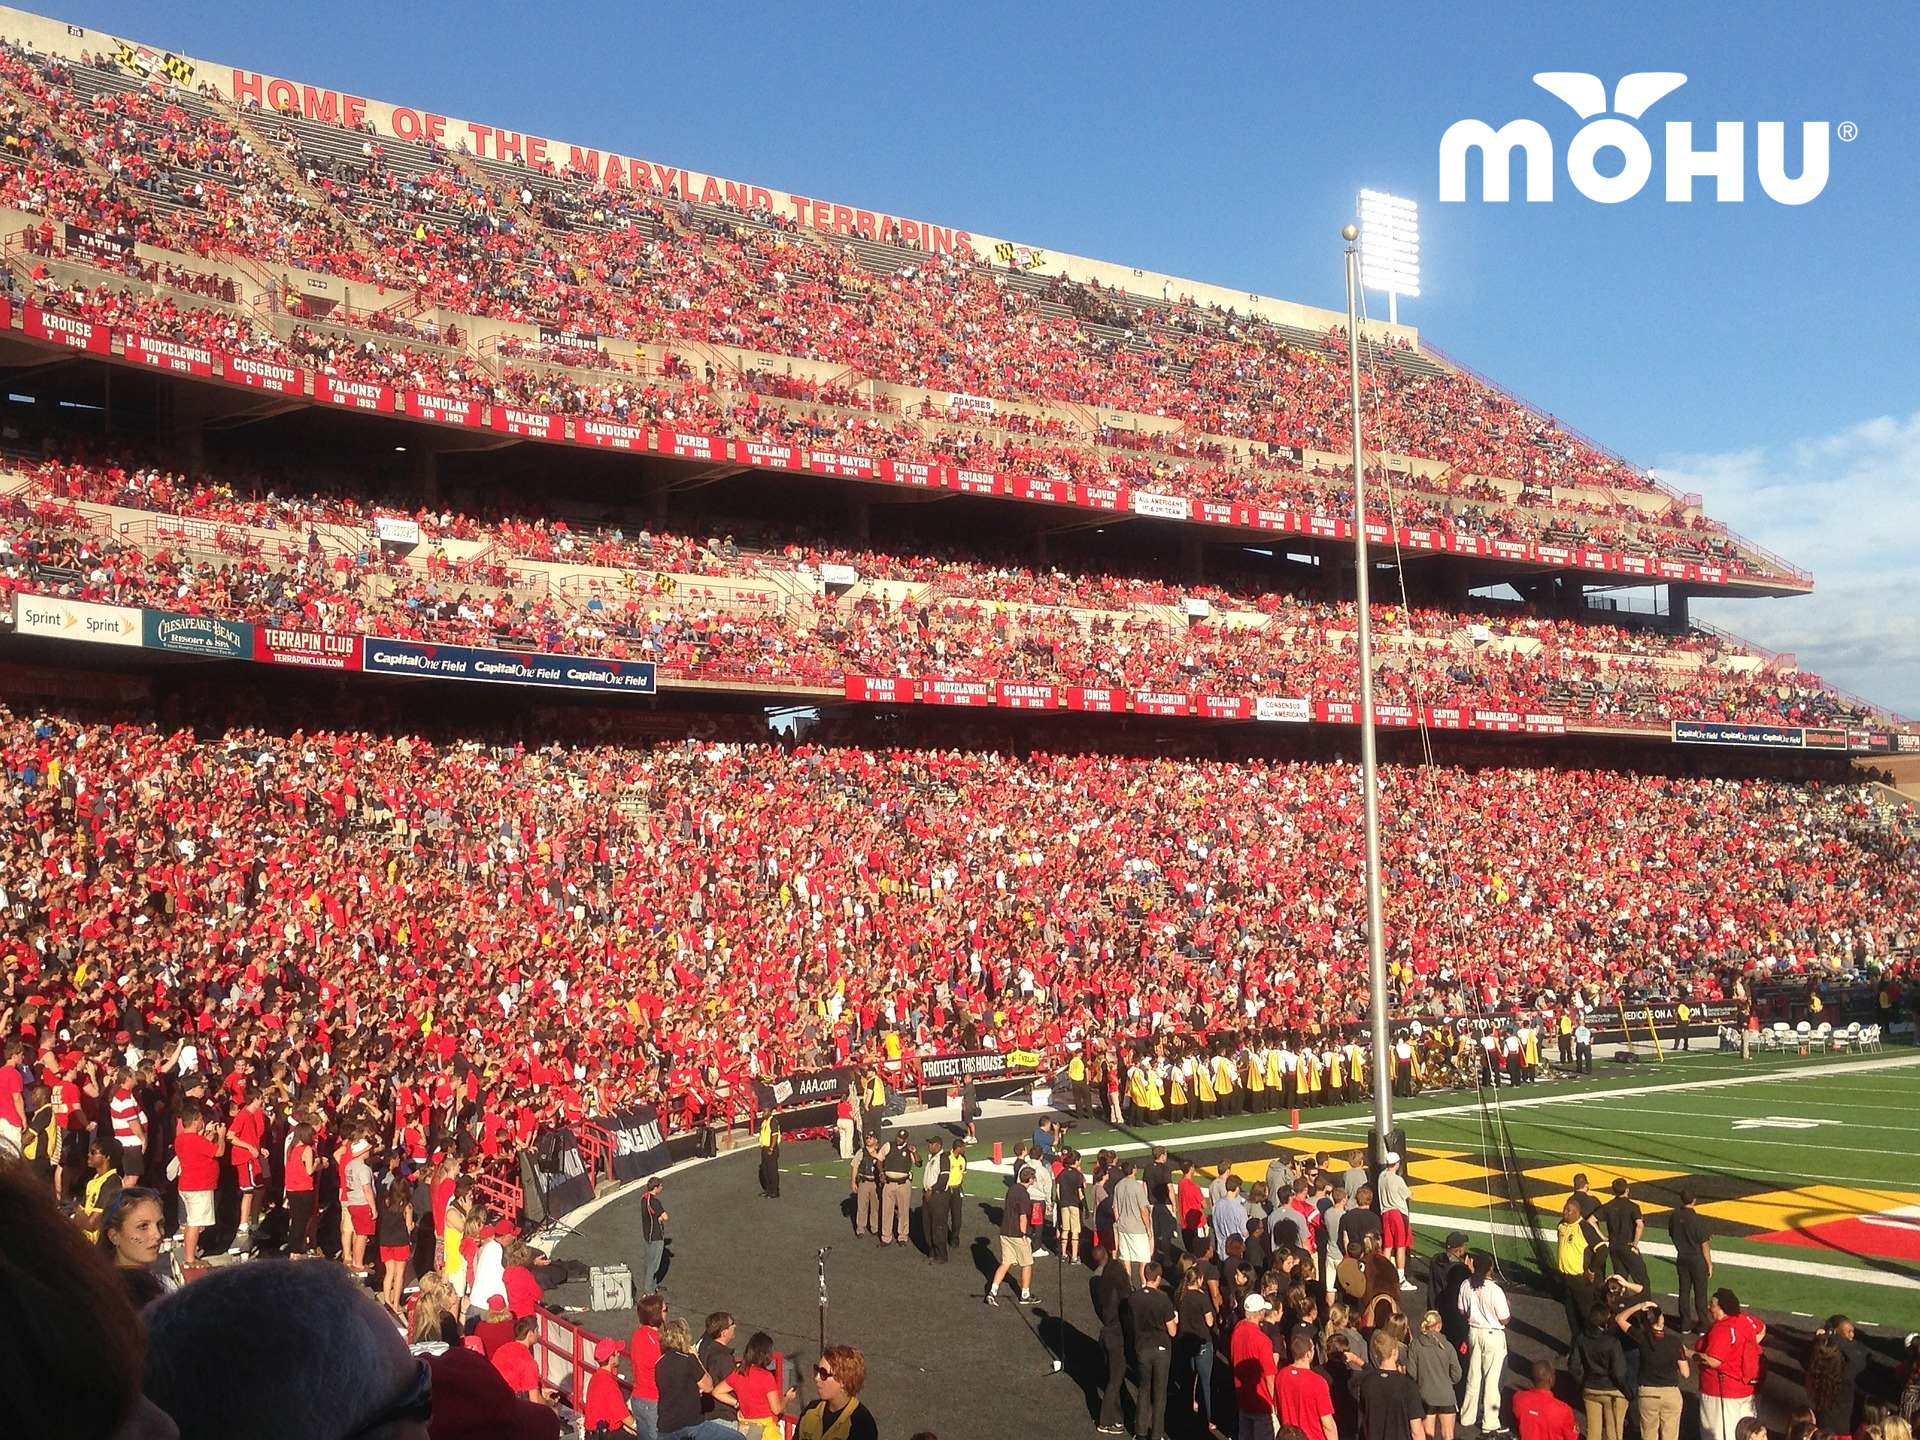 football stadium showing bleachers filled with fans with mohu logo